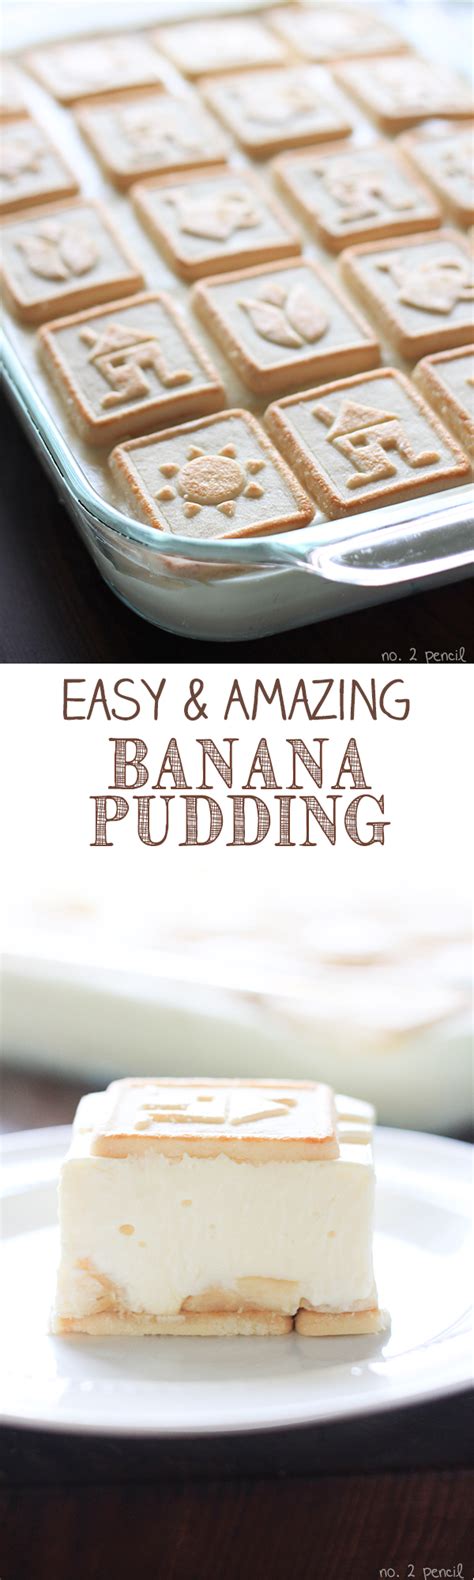 Use an electric mixer to get smooth pudding results. Paula Deen Banana Pudding Recipe